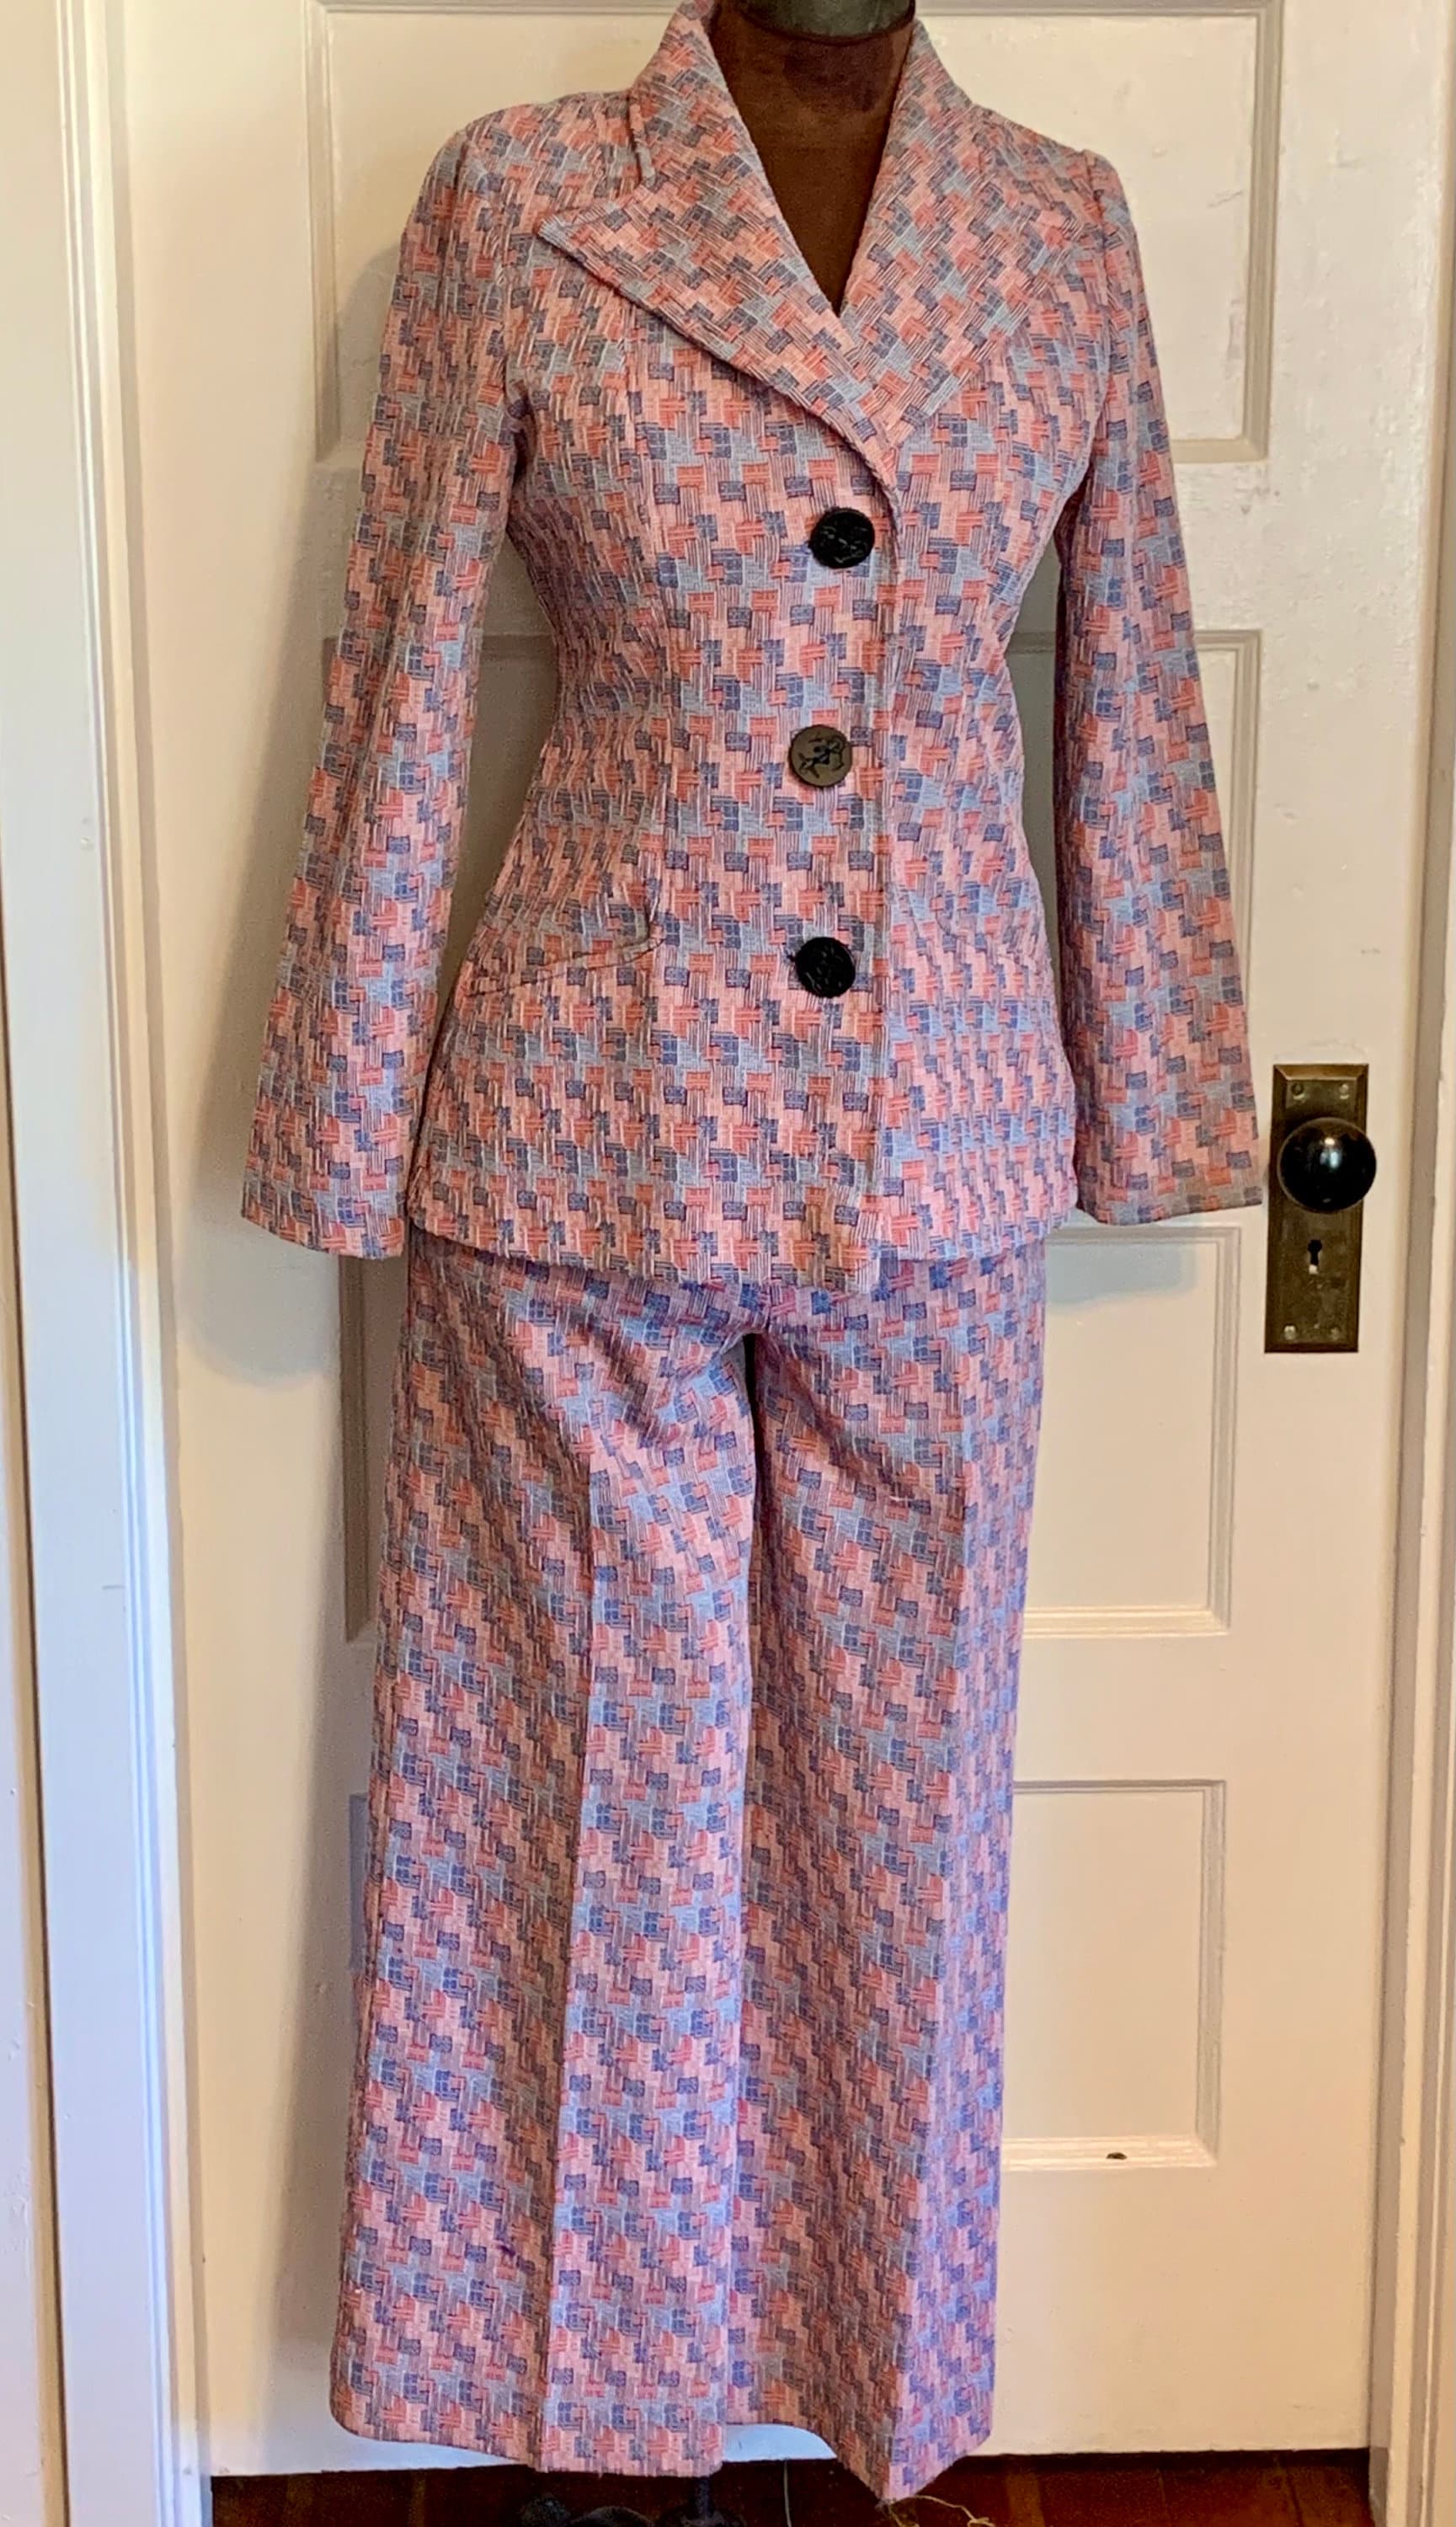 Size 10 Petite Purple and Pink Plaid 1970s Polyester/wool Leisure Pant Suit.groovy  Two Piece Suit. Mod Retro Outfit. Disco.classic 70s Style 